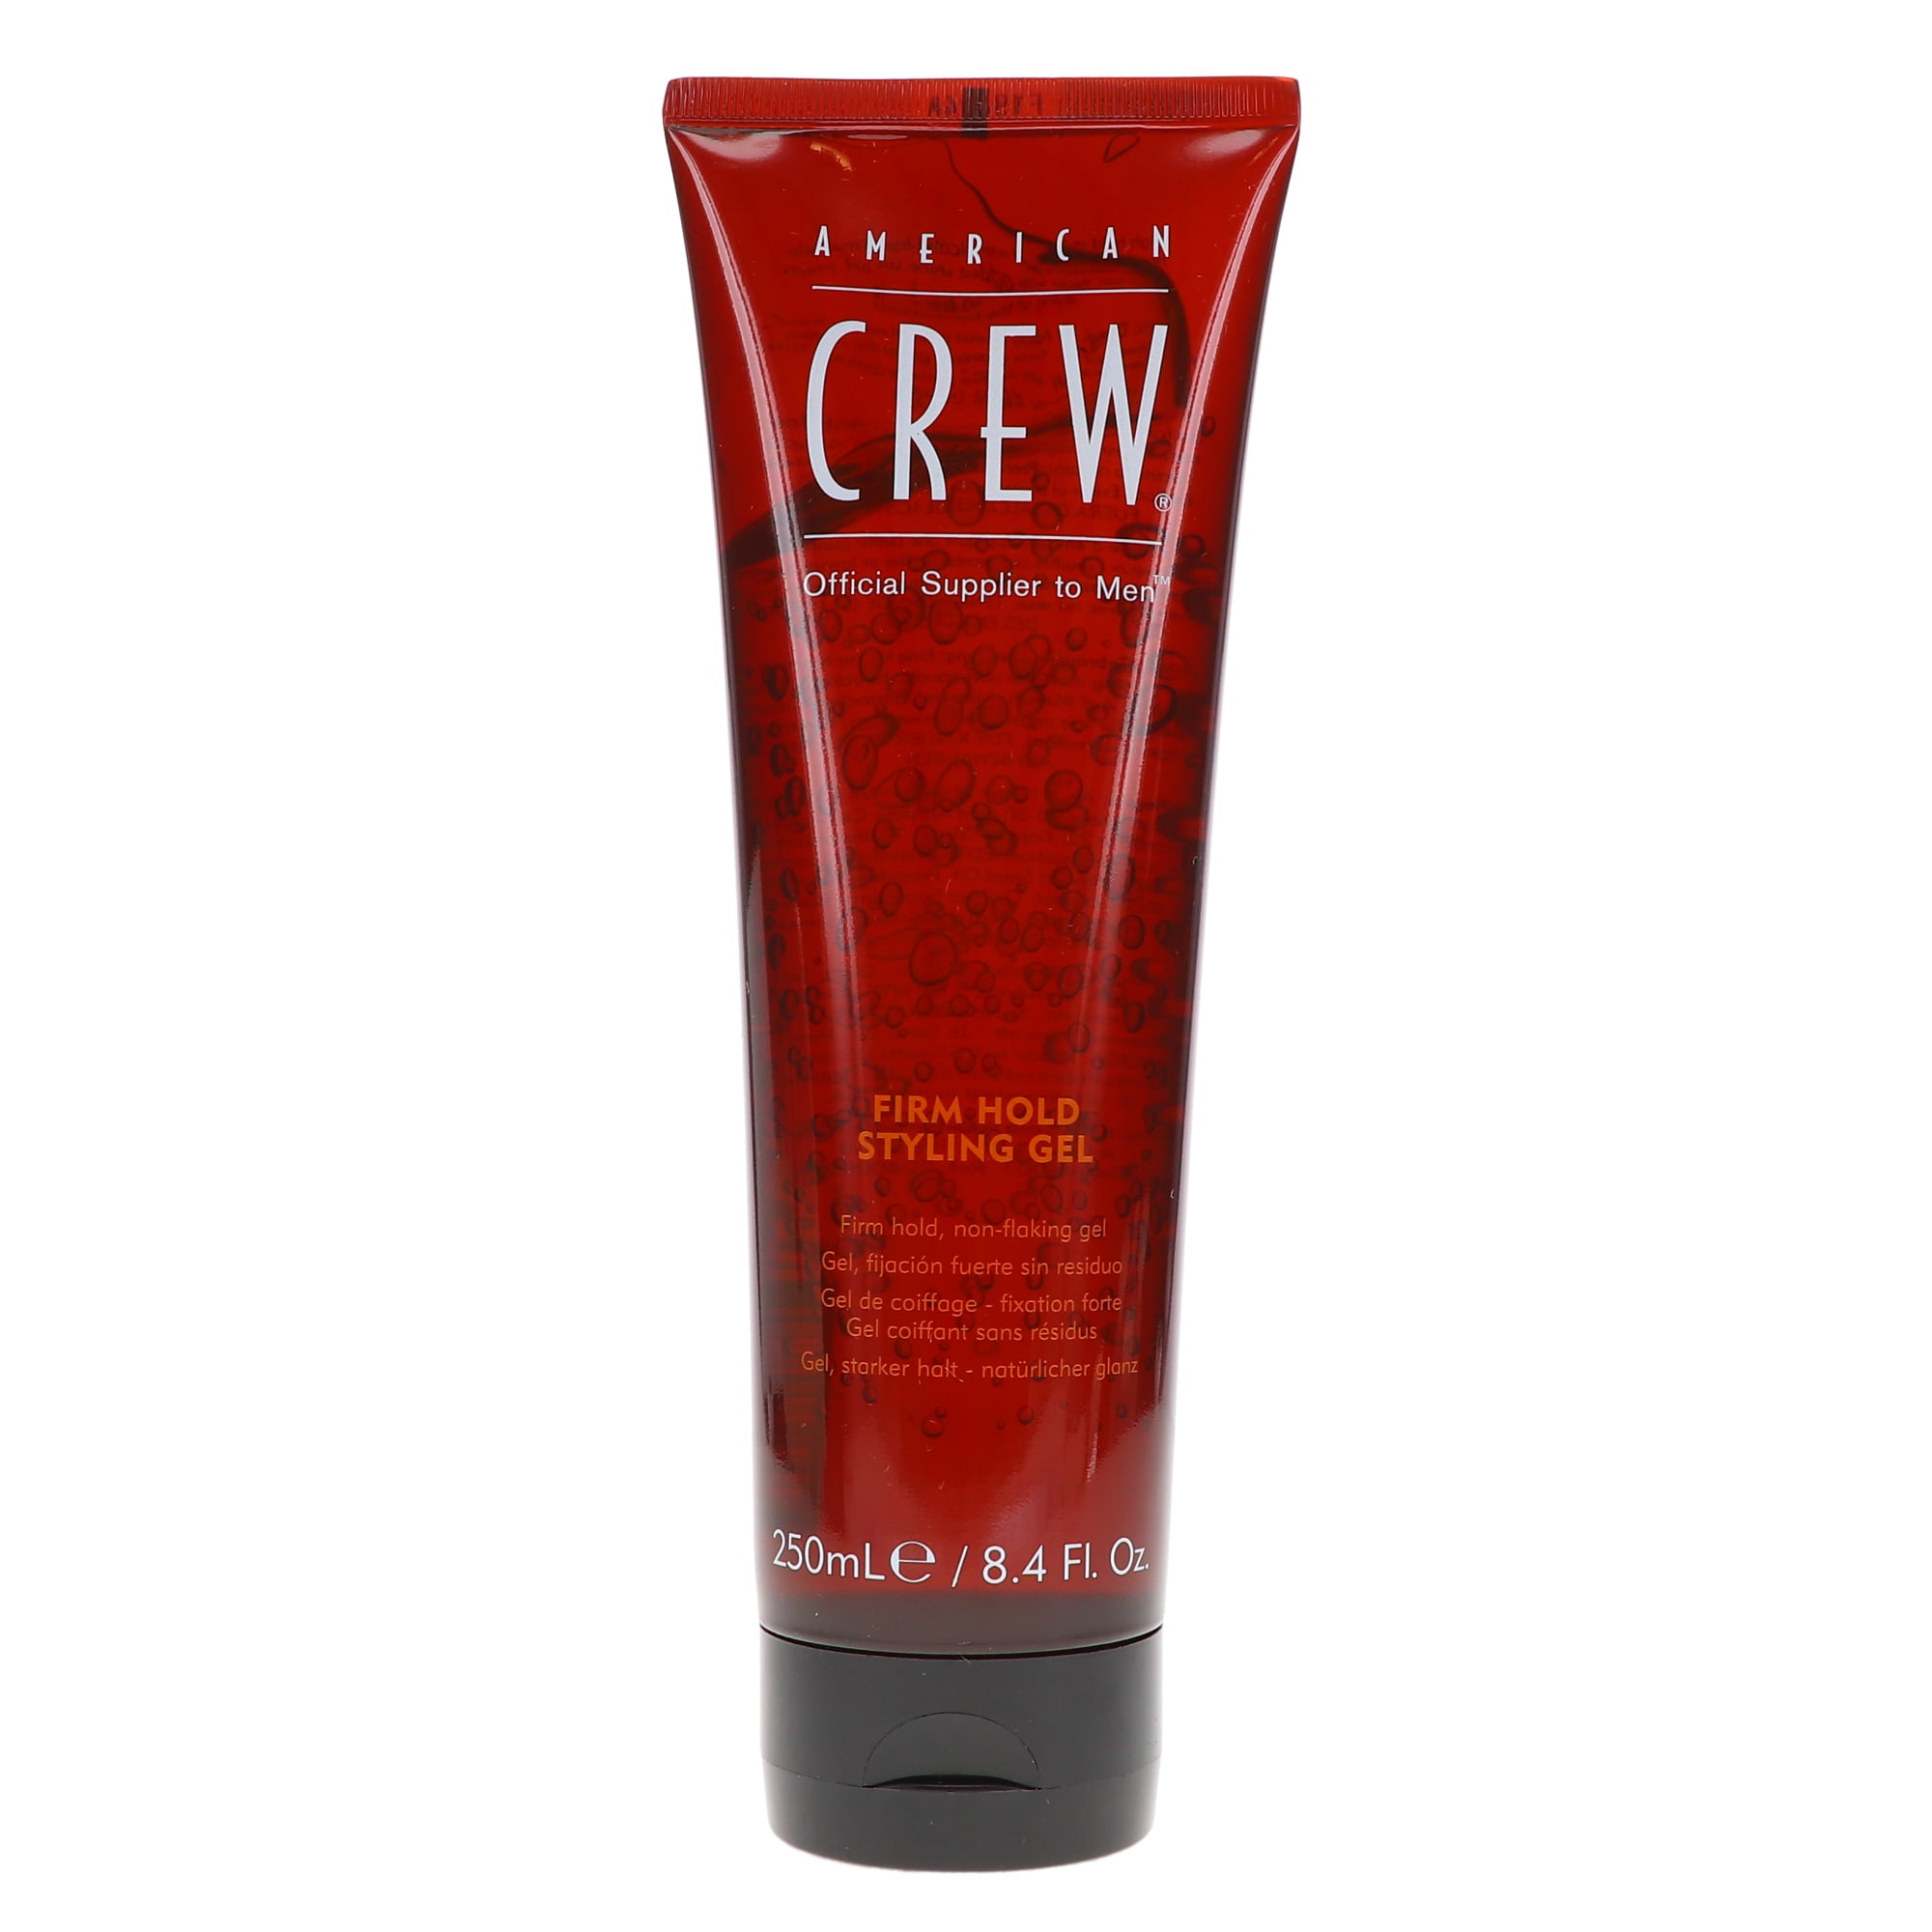 American Crew Official Supplier to Men Nourishing Dandruff Relief Thickening Firm Hold Squeeze Hair Styling Gel, 8.4 fl oz